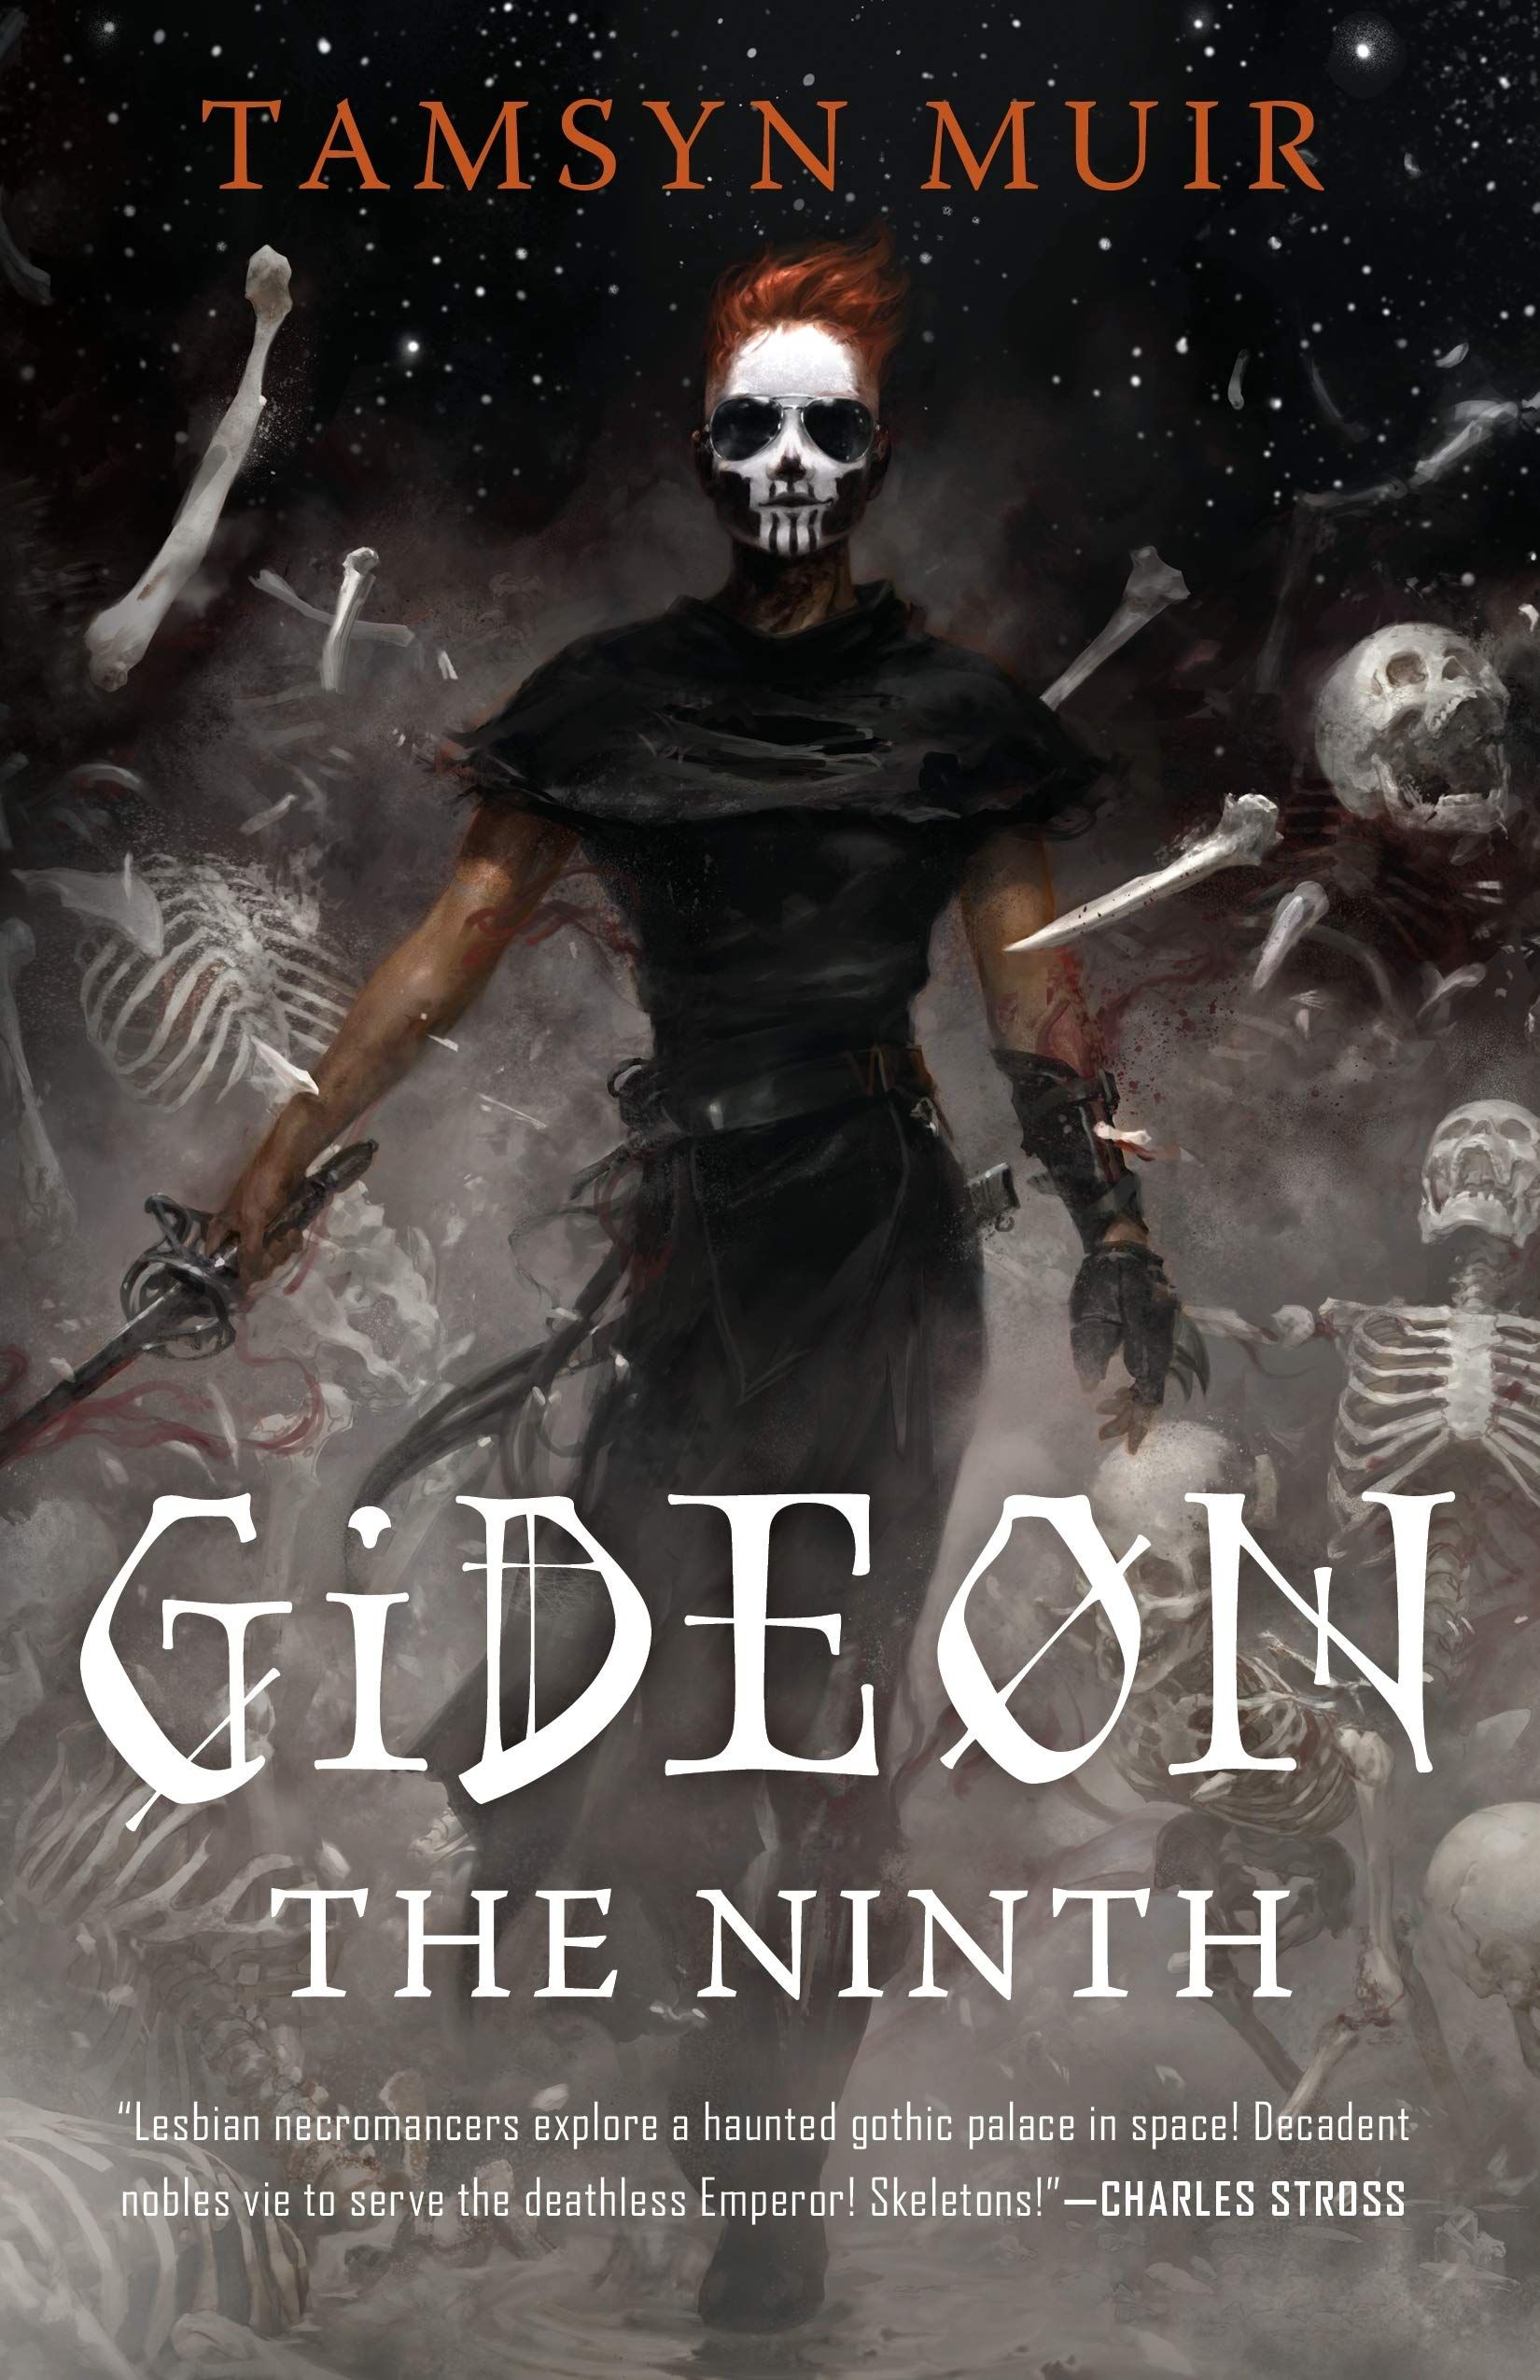 Gideon the Ninth Book Cover